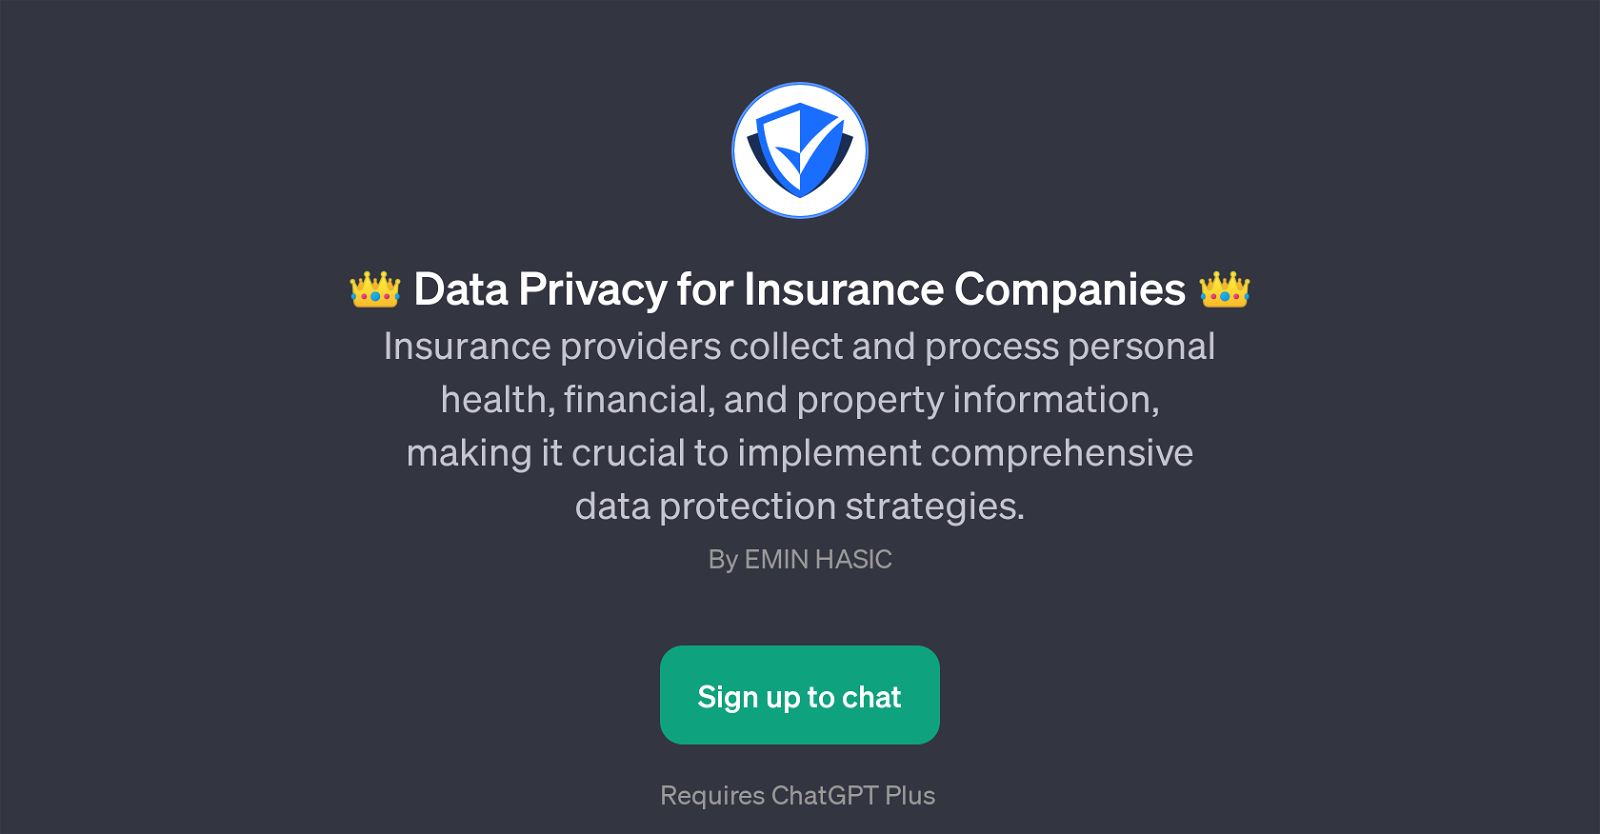 Data Privacy for Insurance Companies website